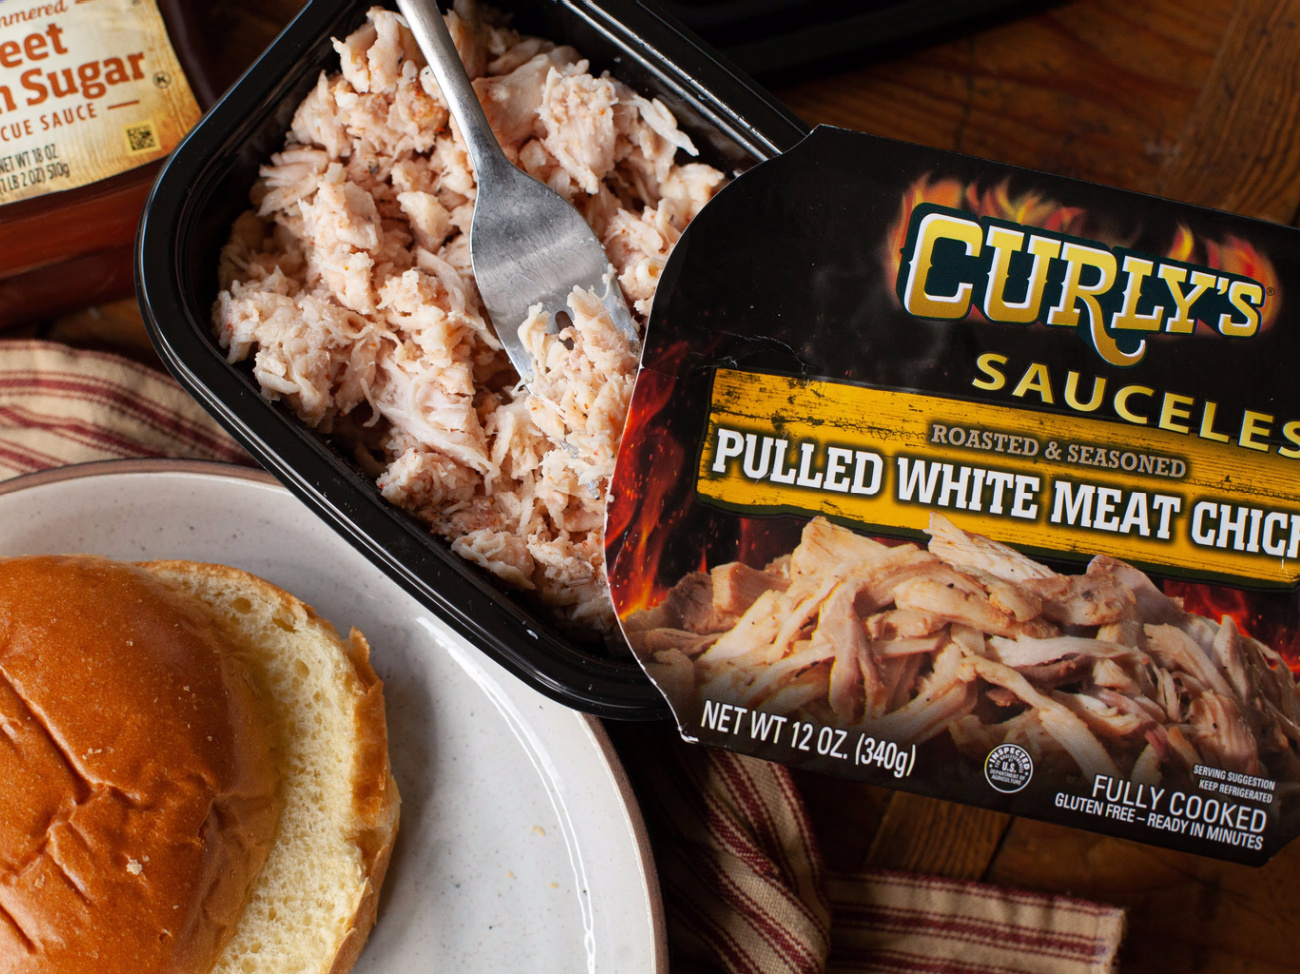 Curly’s Pulled Pork Or Chicken Just $3.49 At Kroger